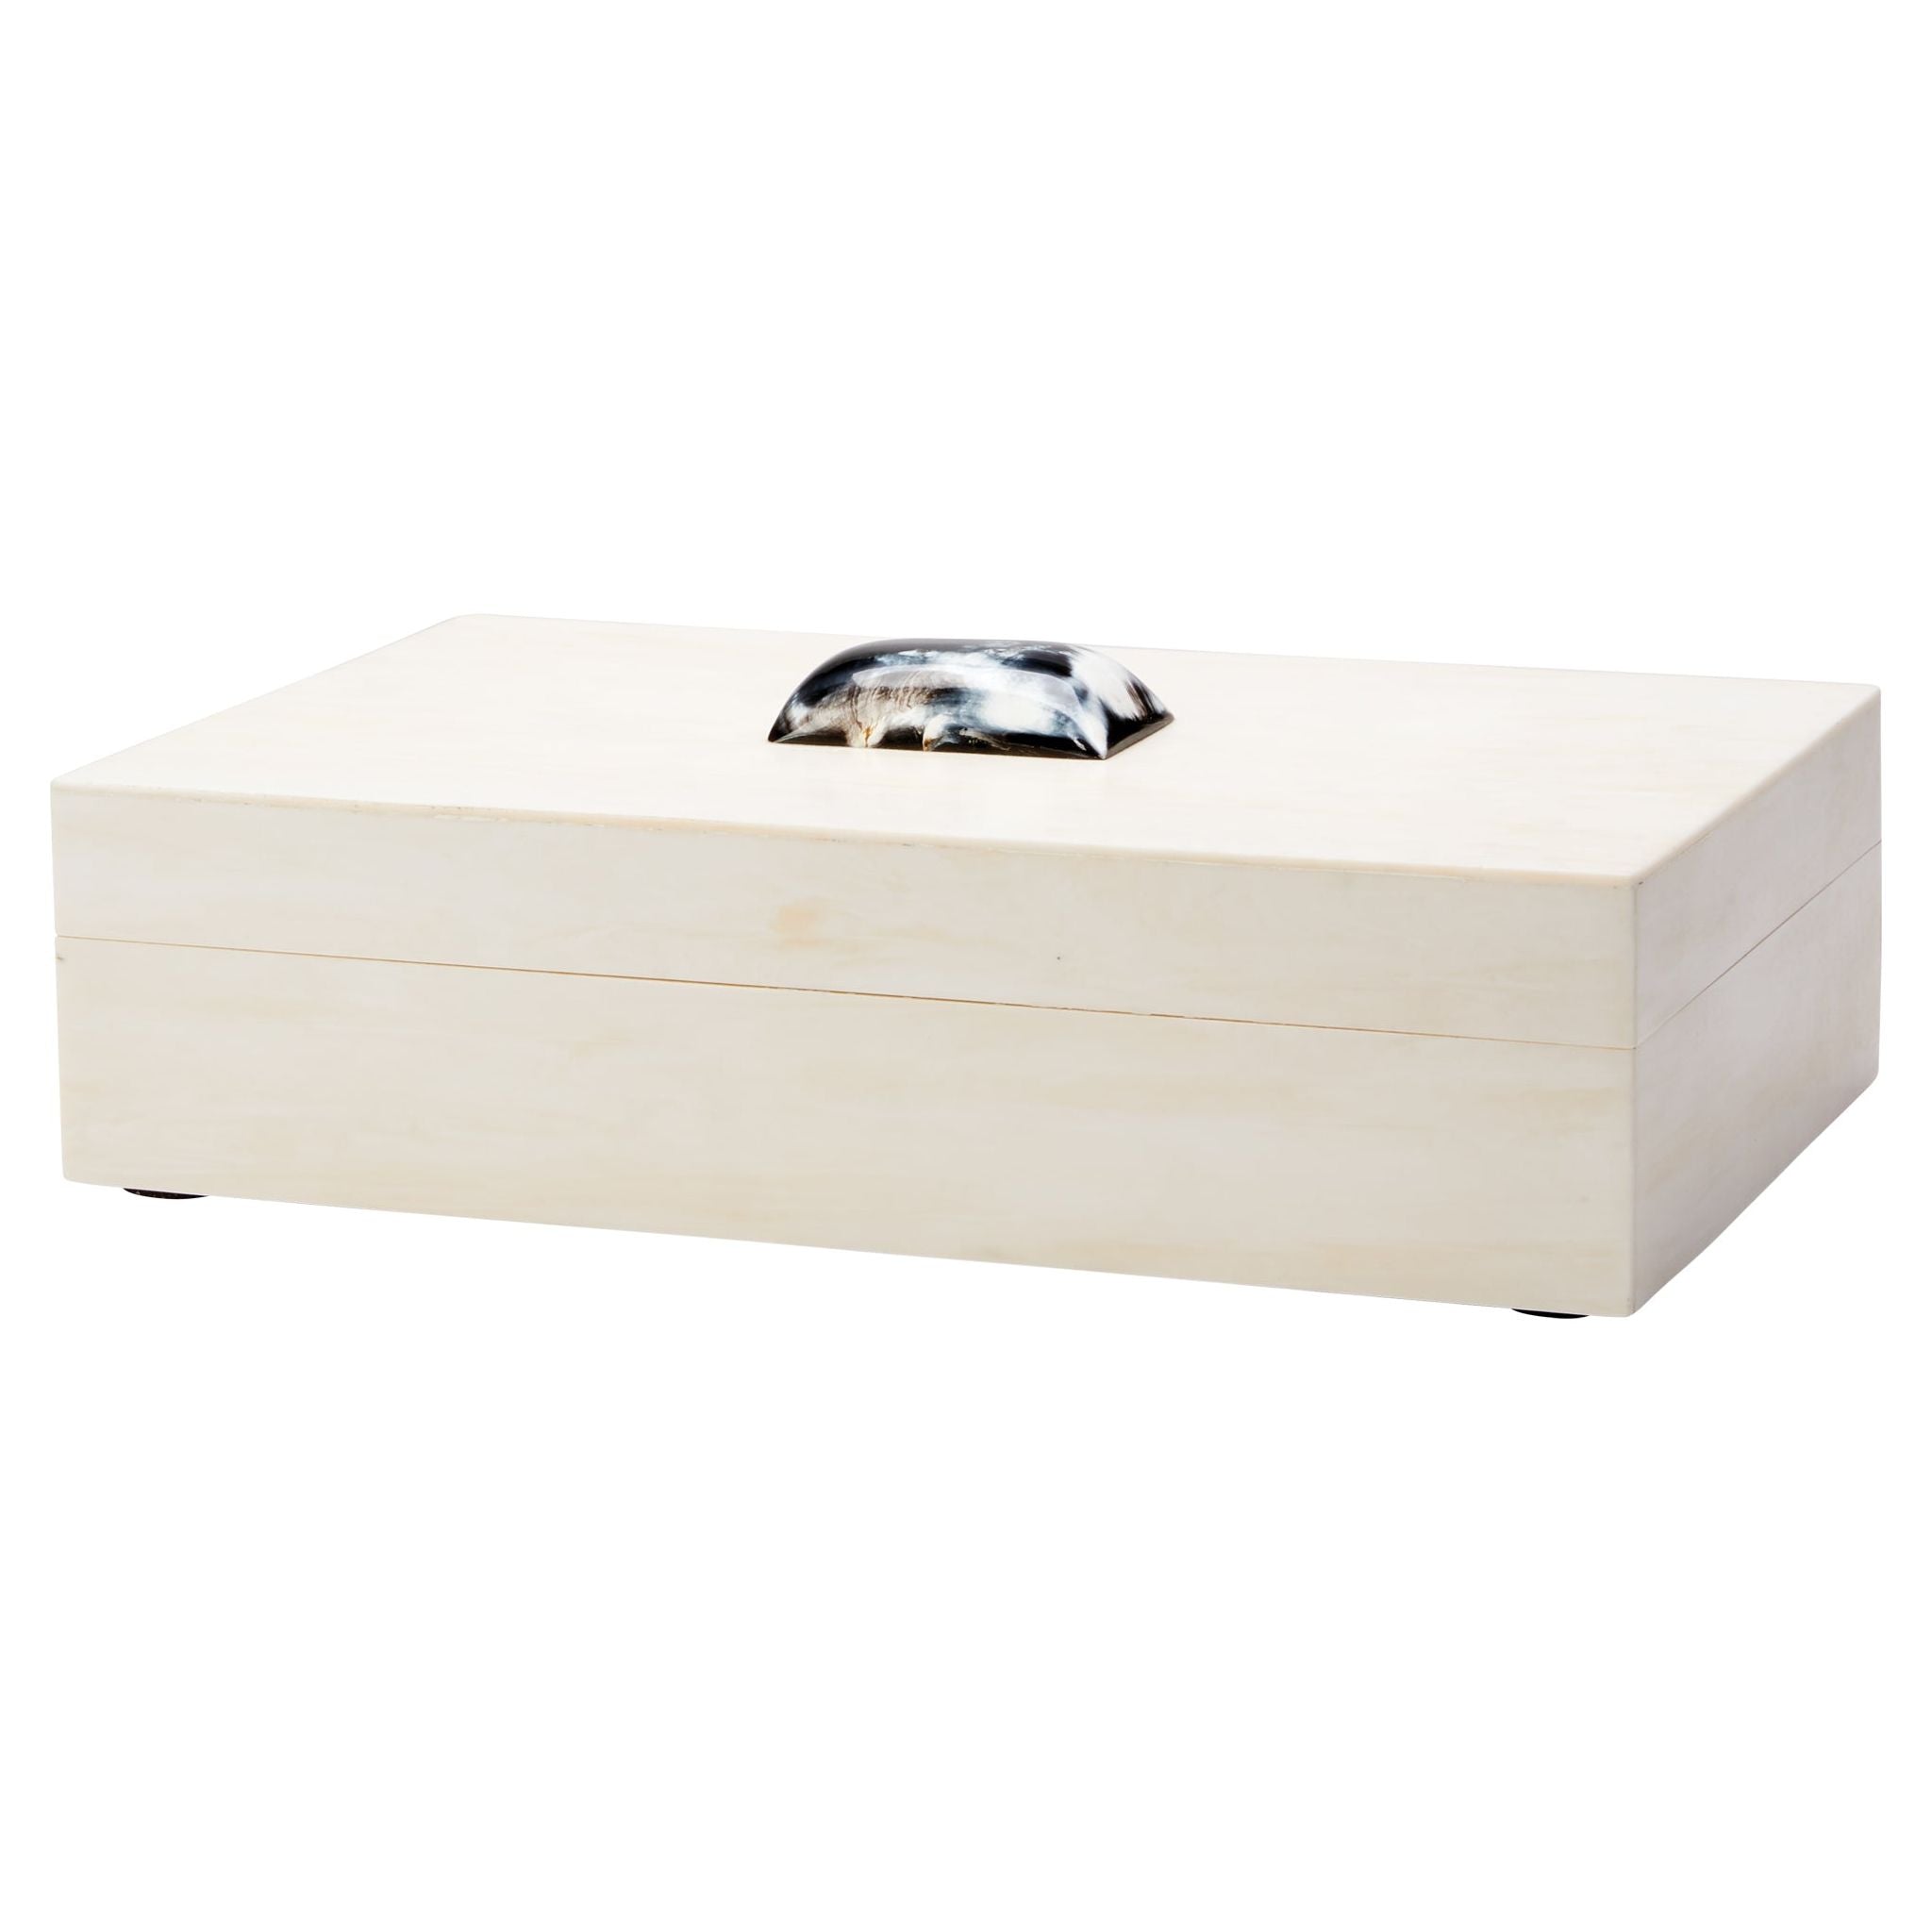 Jamie Young Company - 7CONS-BXCR - Constantine Large Rectangle Box - Constantine - Cream